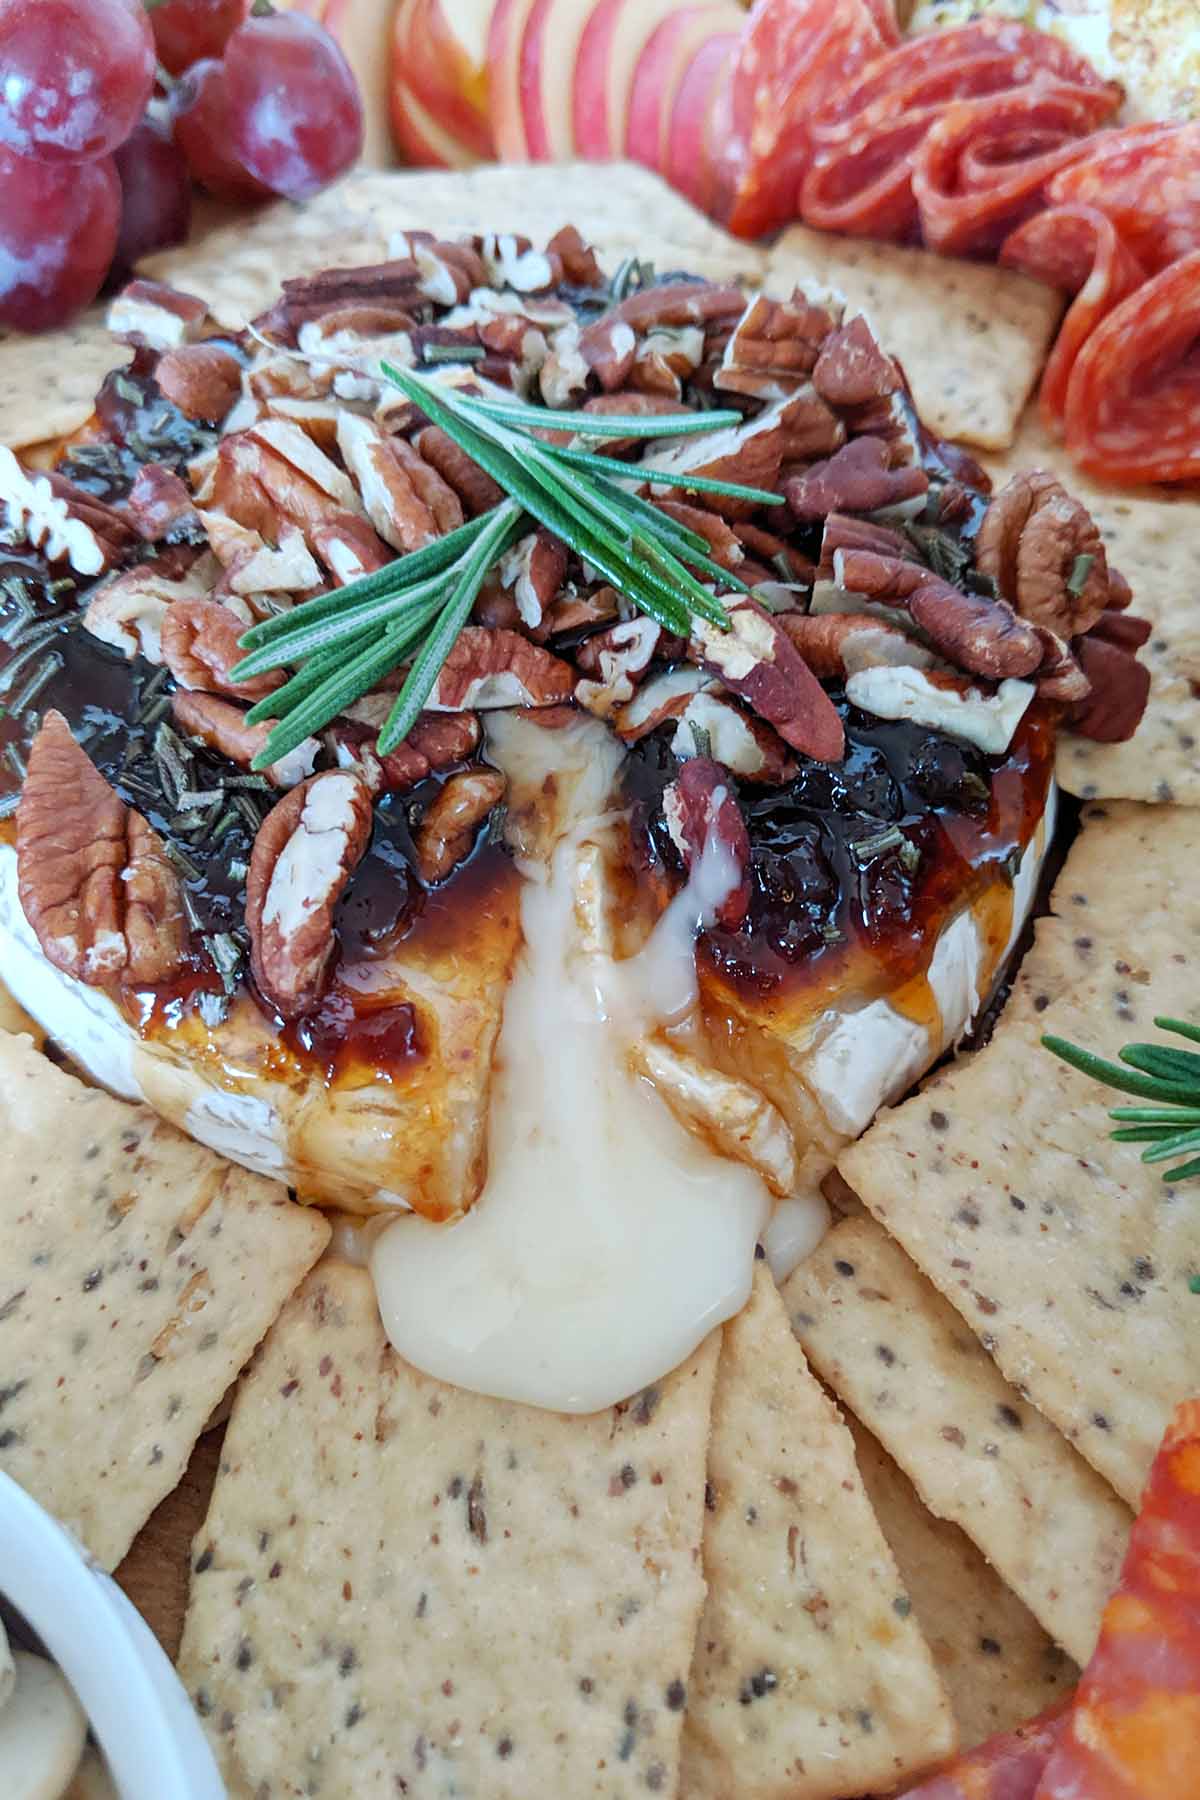 baked brie cheese topped with nuts on a charcuterie board.